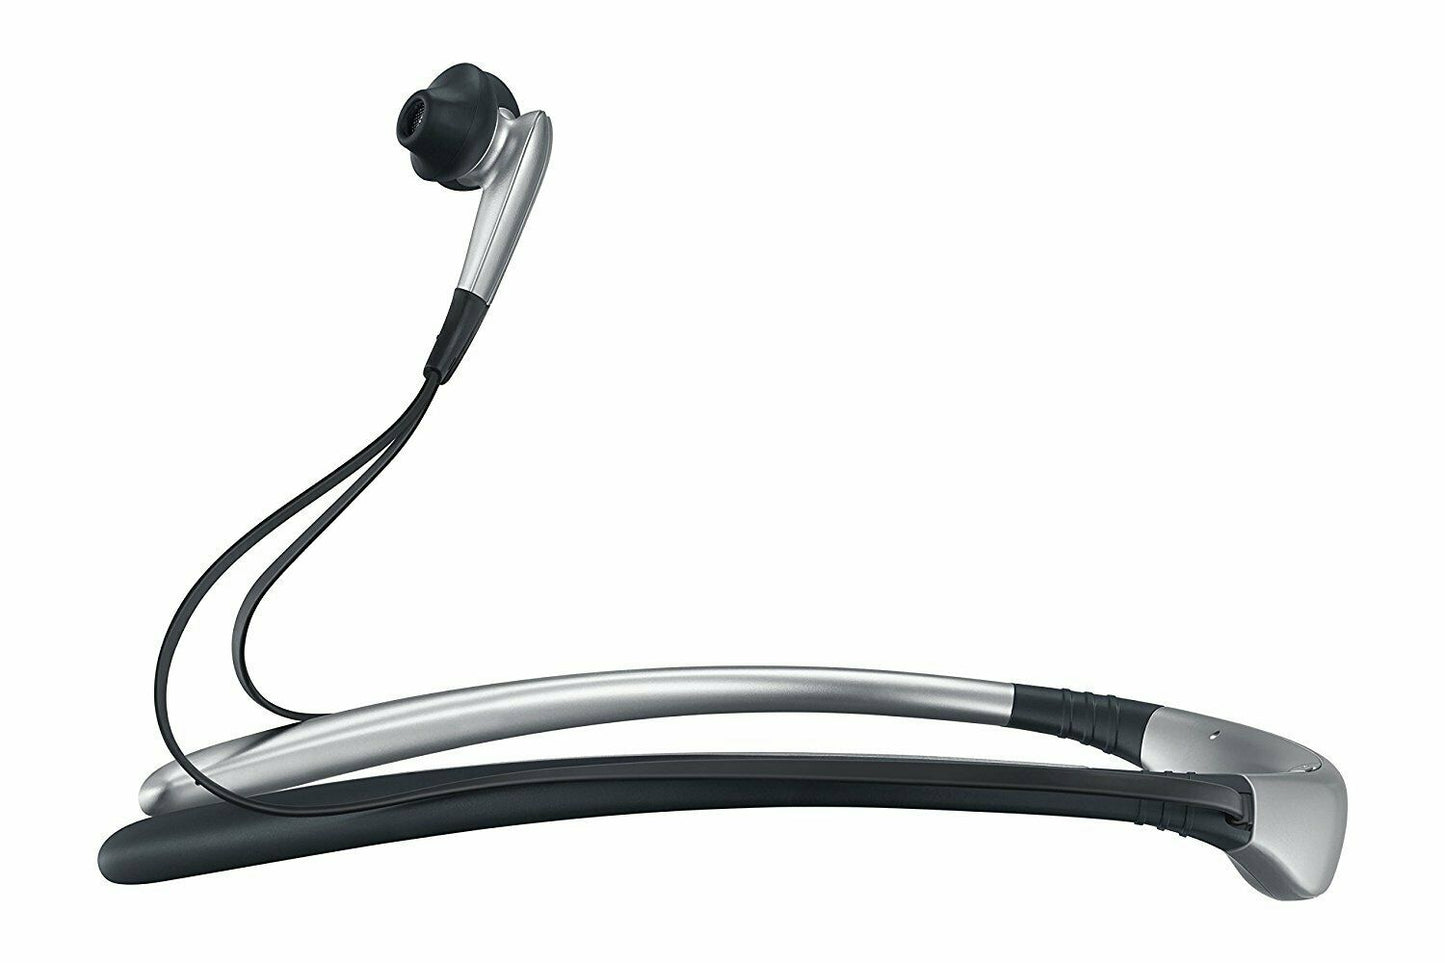 Samsung U Bluetooth Earbuds In-ear Wireless Headphones with Microphone - Silver